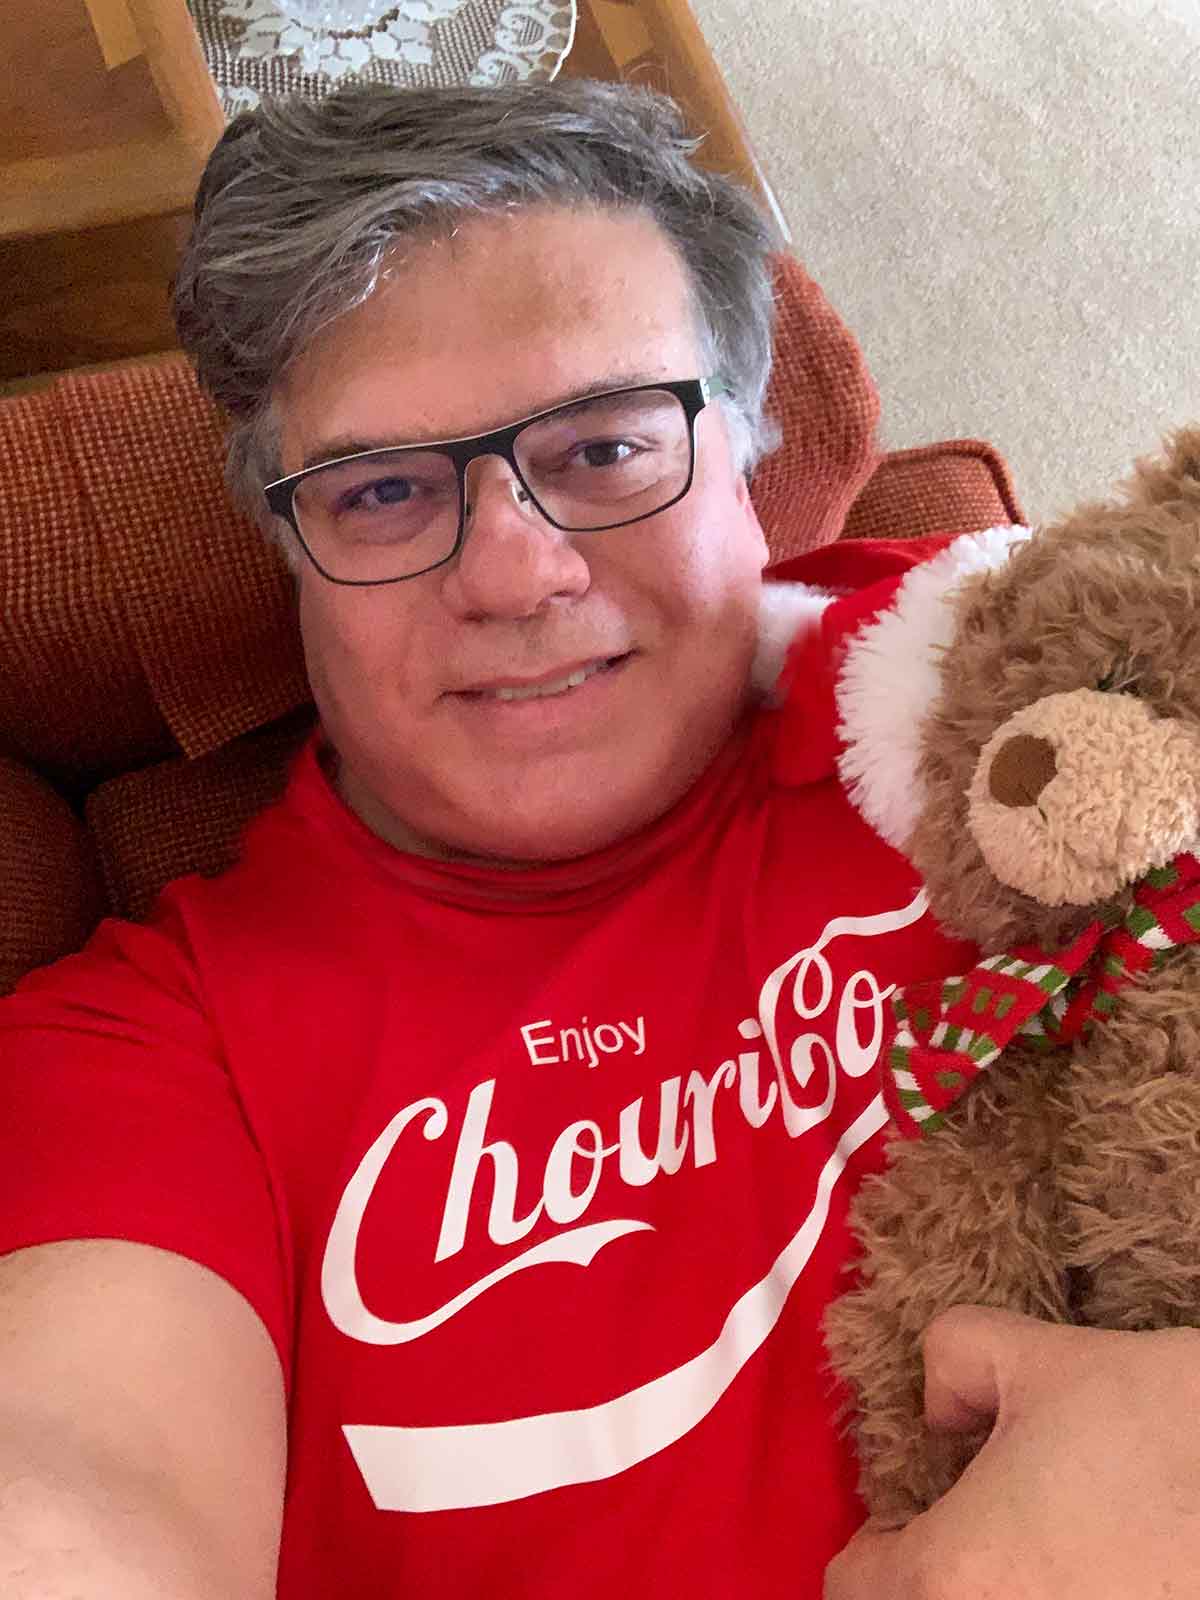 David is enjoying some down-home hygge wearing his favorite t-shirt while snuggled on the couch with a stuffed animal.